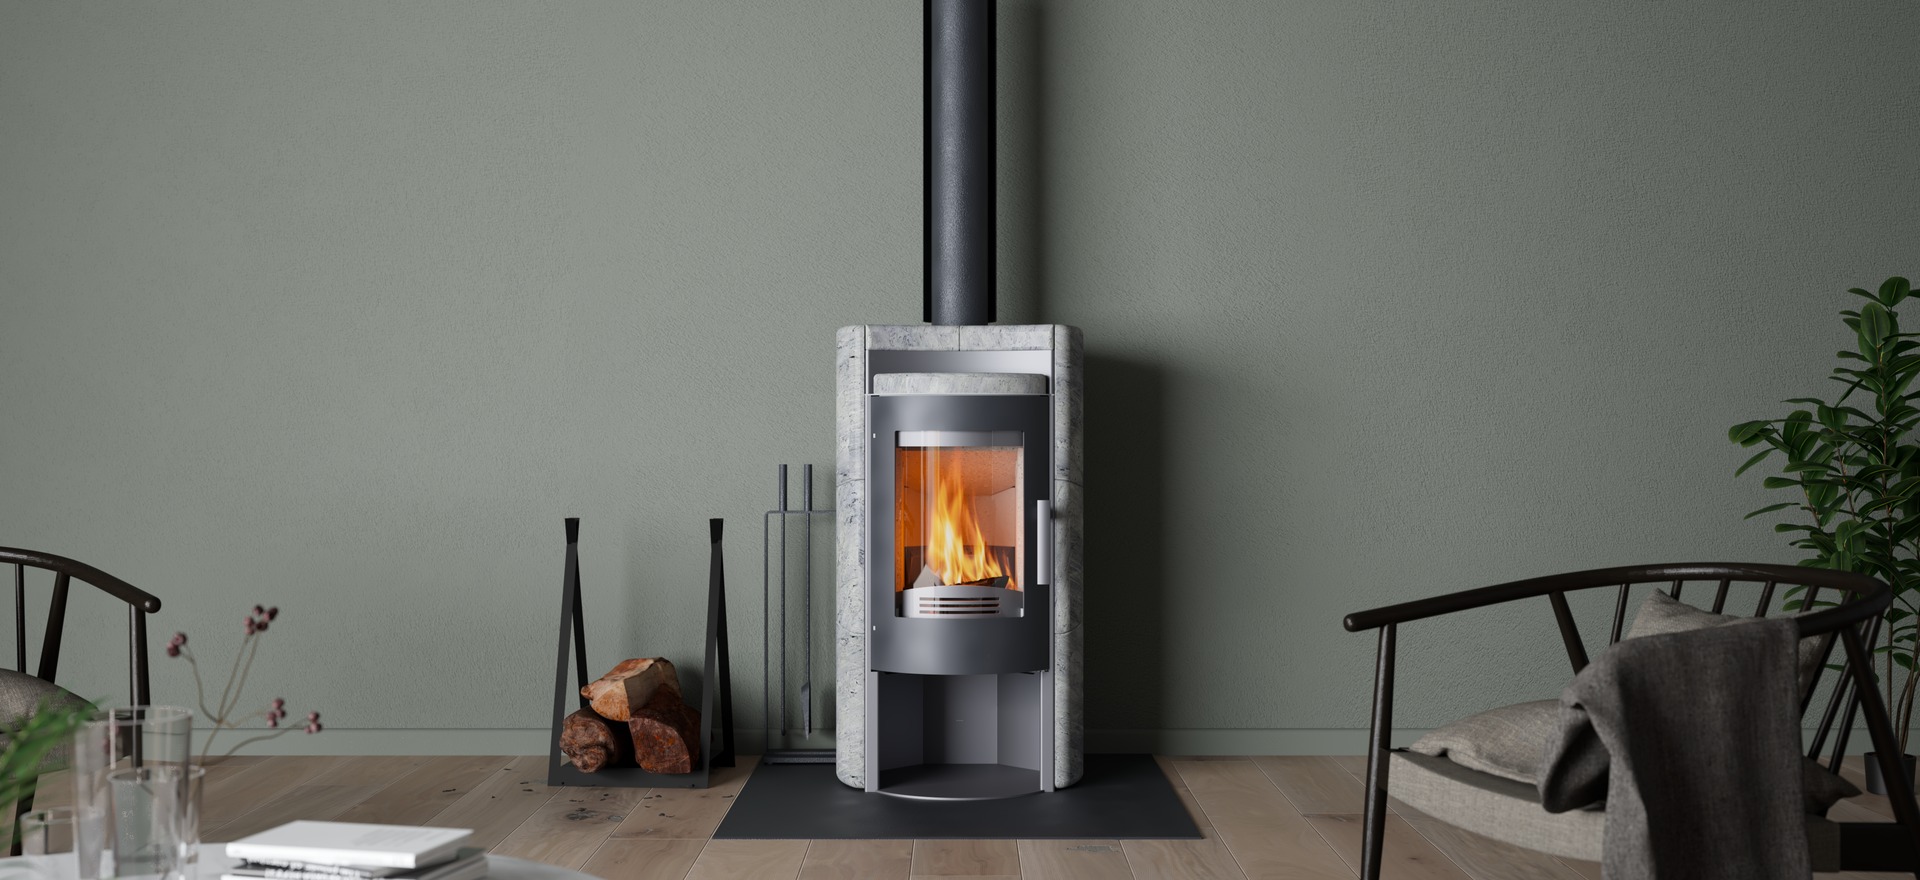 Eco-friendly elegance: exploring the best modern wood fireplaces for sustainable home heating